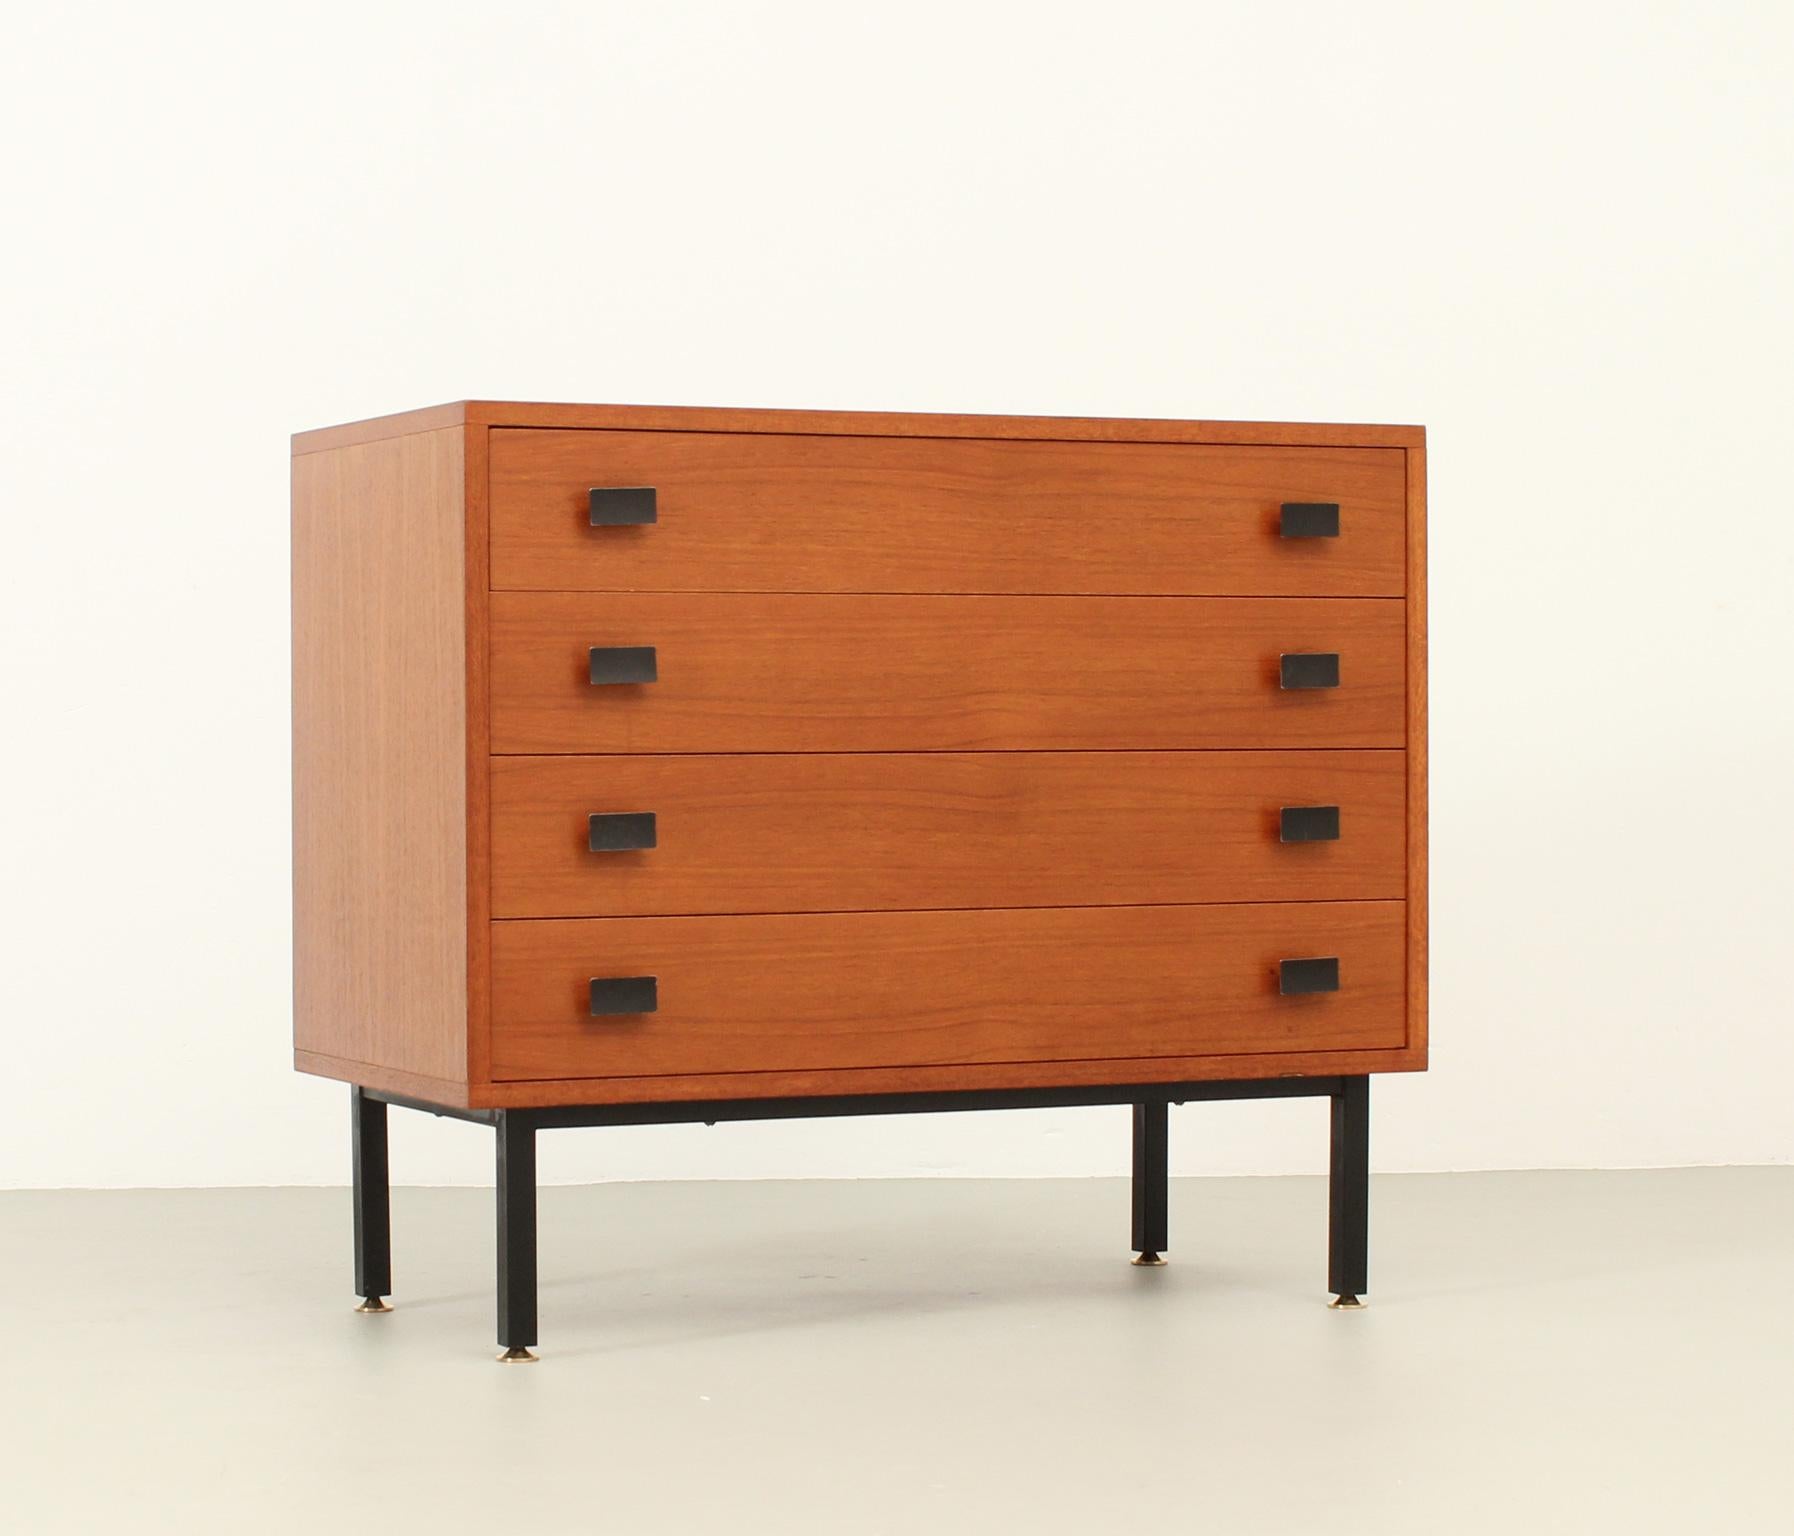 Chest of drawers designed by Antoine Philippon and Jacqueline Lecoq for Degorre, France, 1957. Teak wood with black metal base and handles and brass fittings. Four drawers.